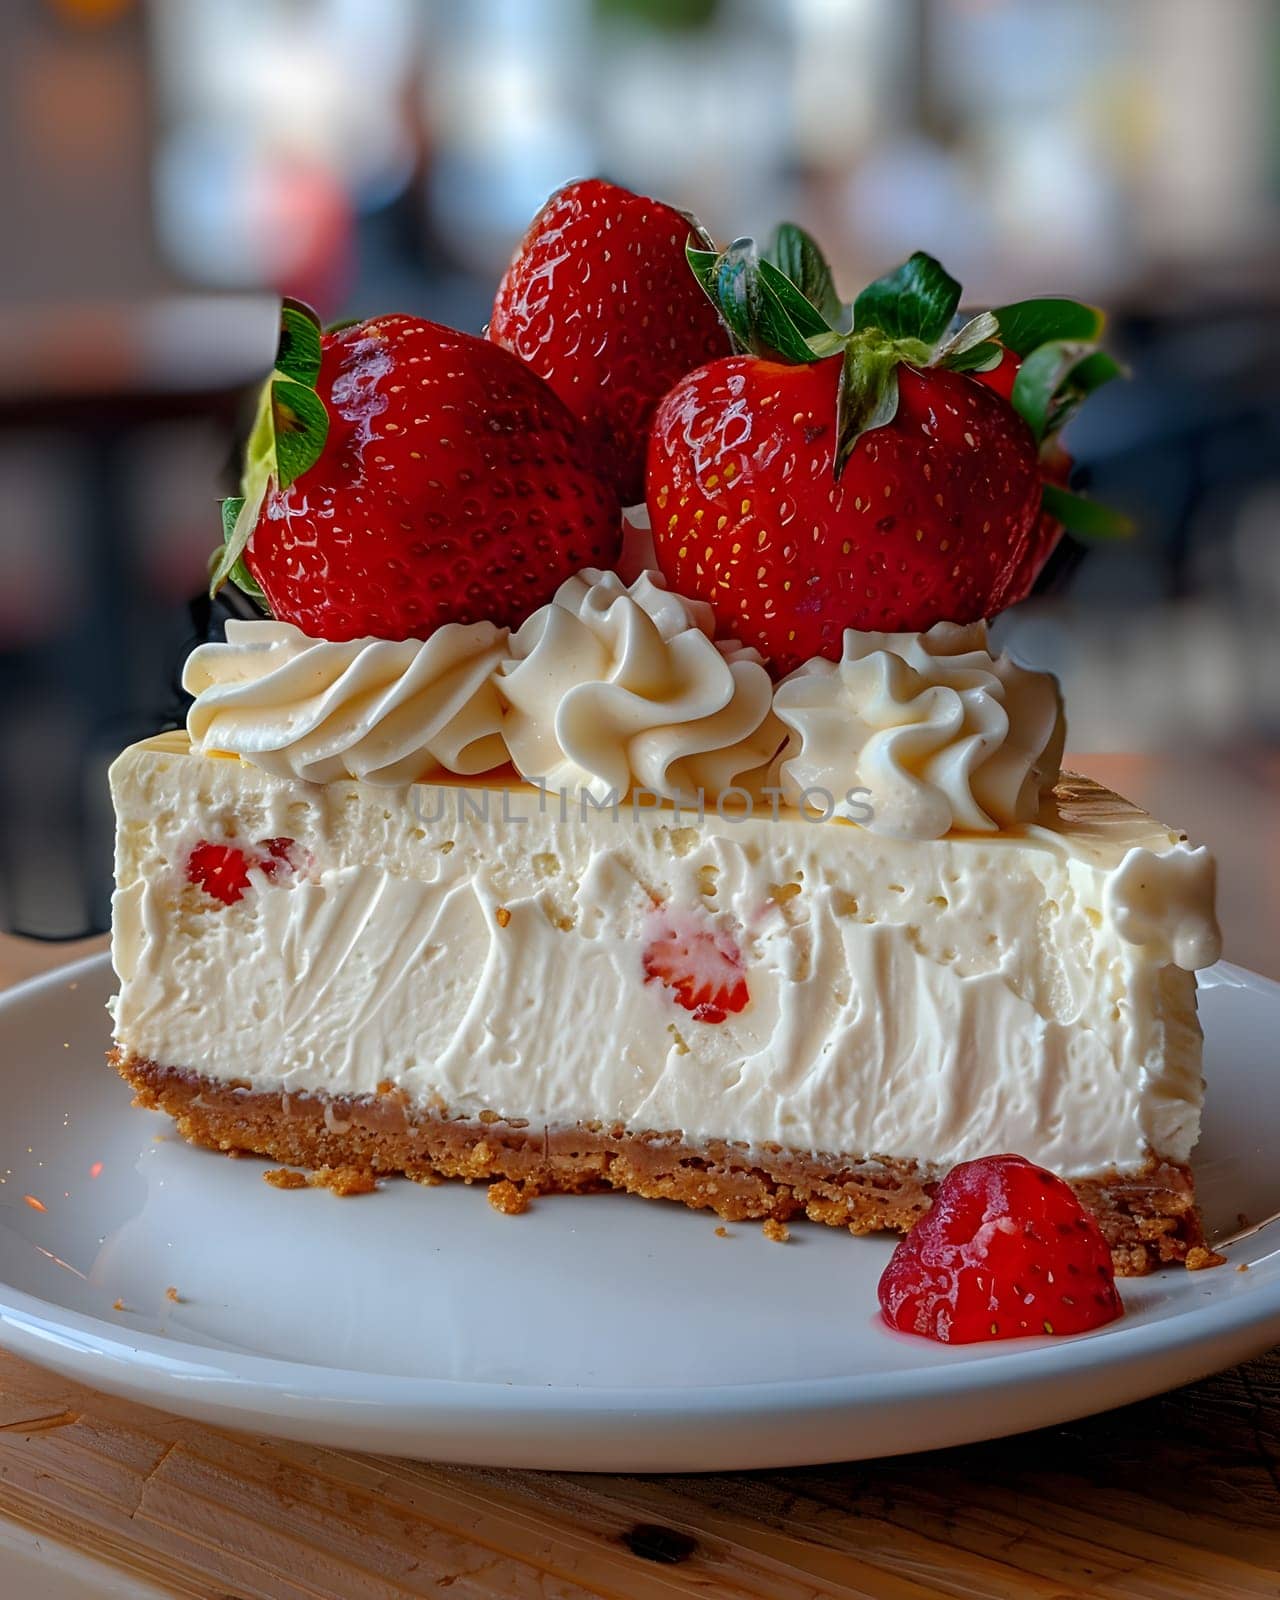 Decadent cheesecake topped with whipped cream and fresh strawberries by Nadtochiy